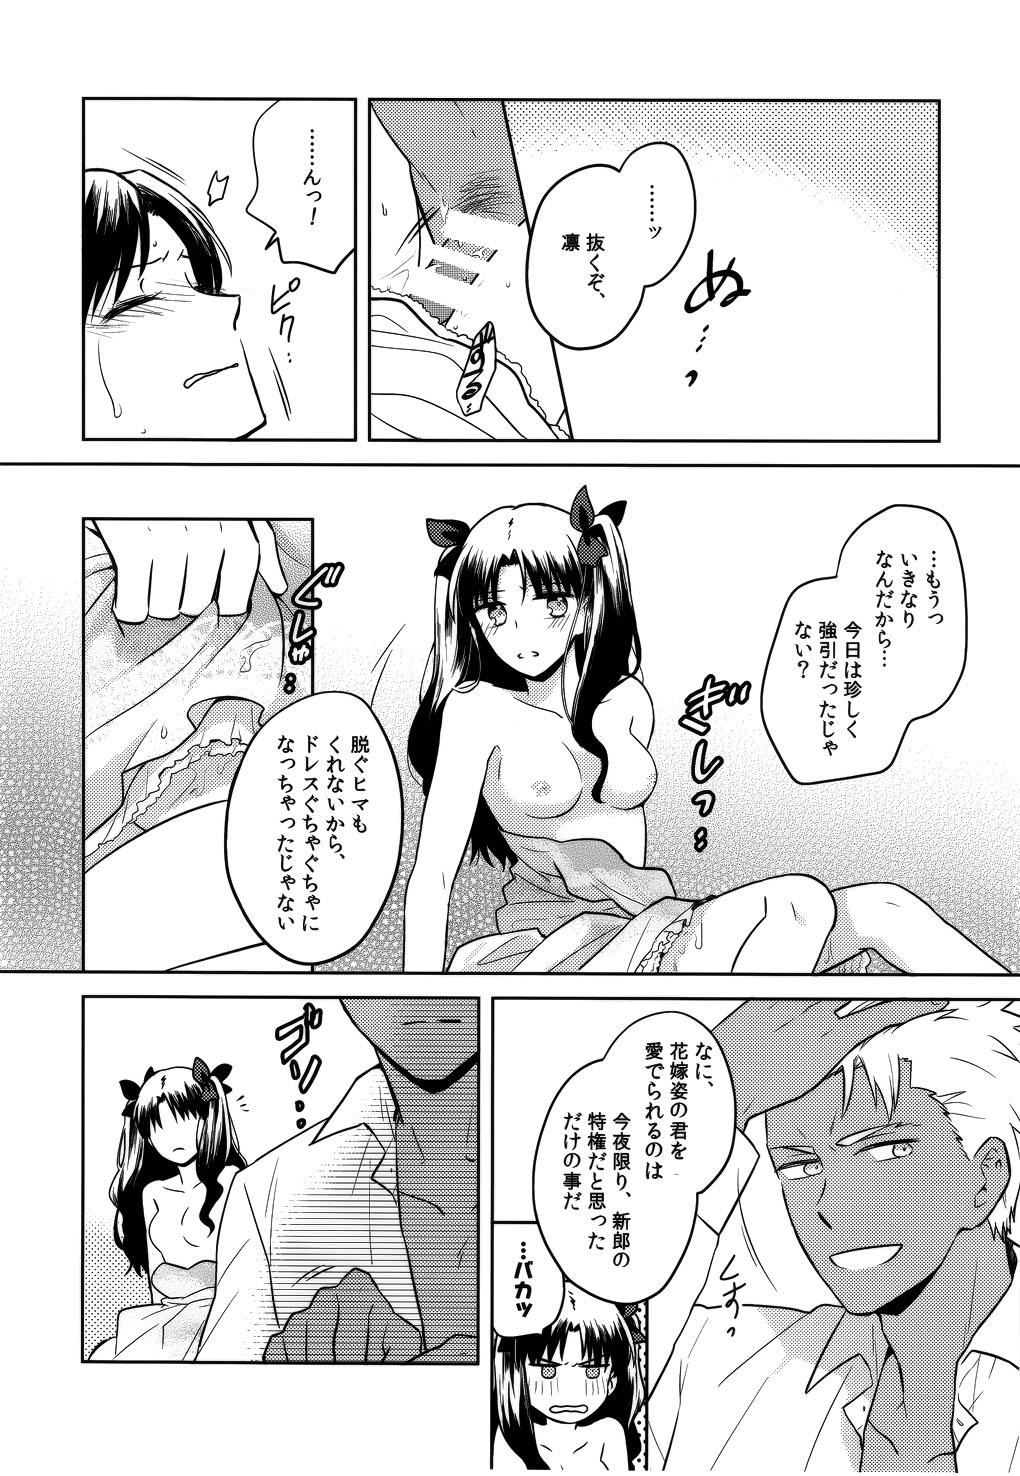 Mamadas RED×RED - Fate stay night Rough Sex - Page 5